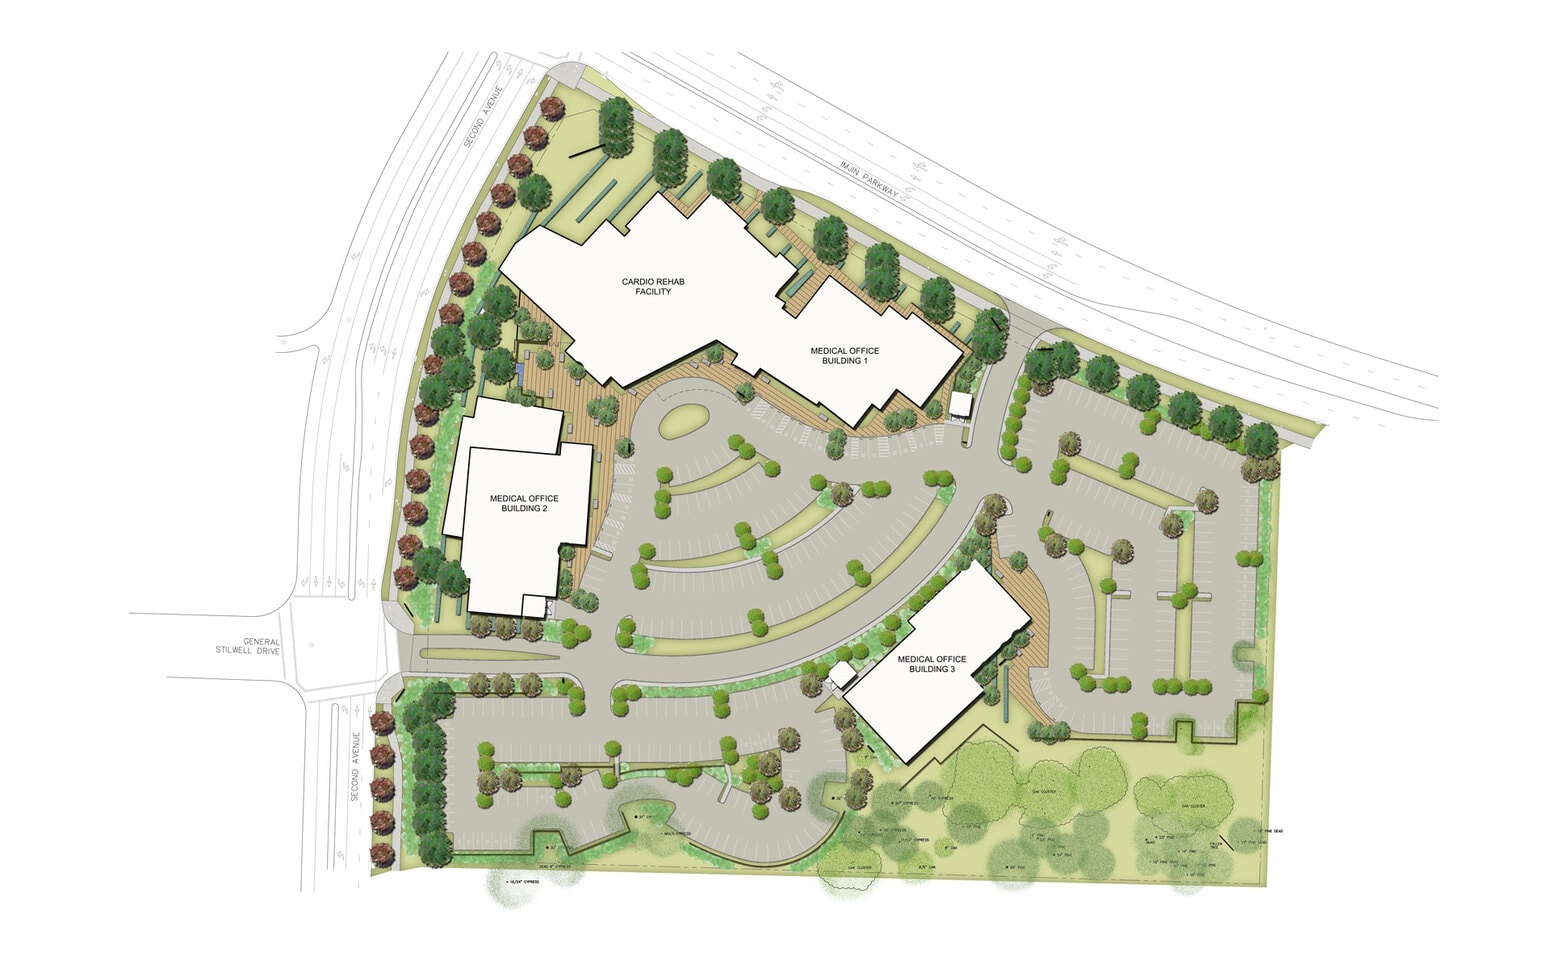 Rendered site plan with buildings and parking area